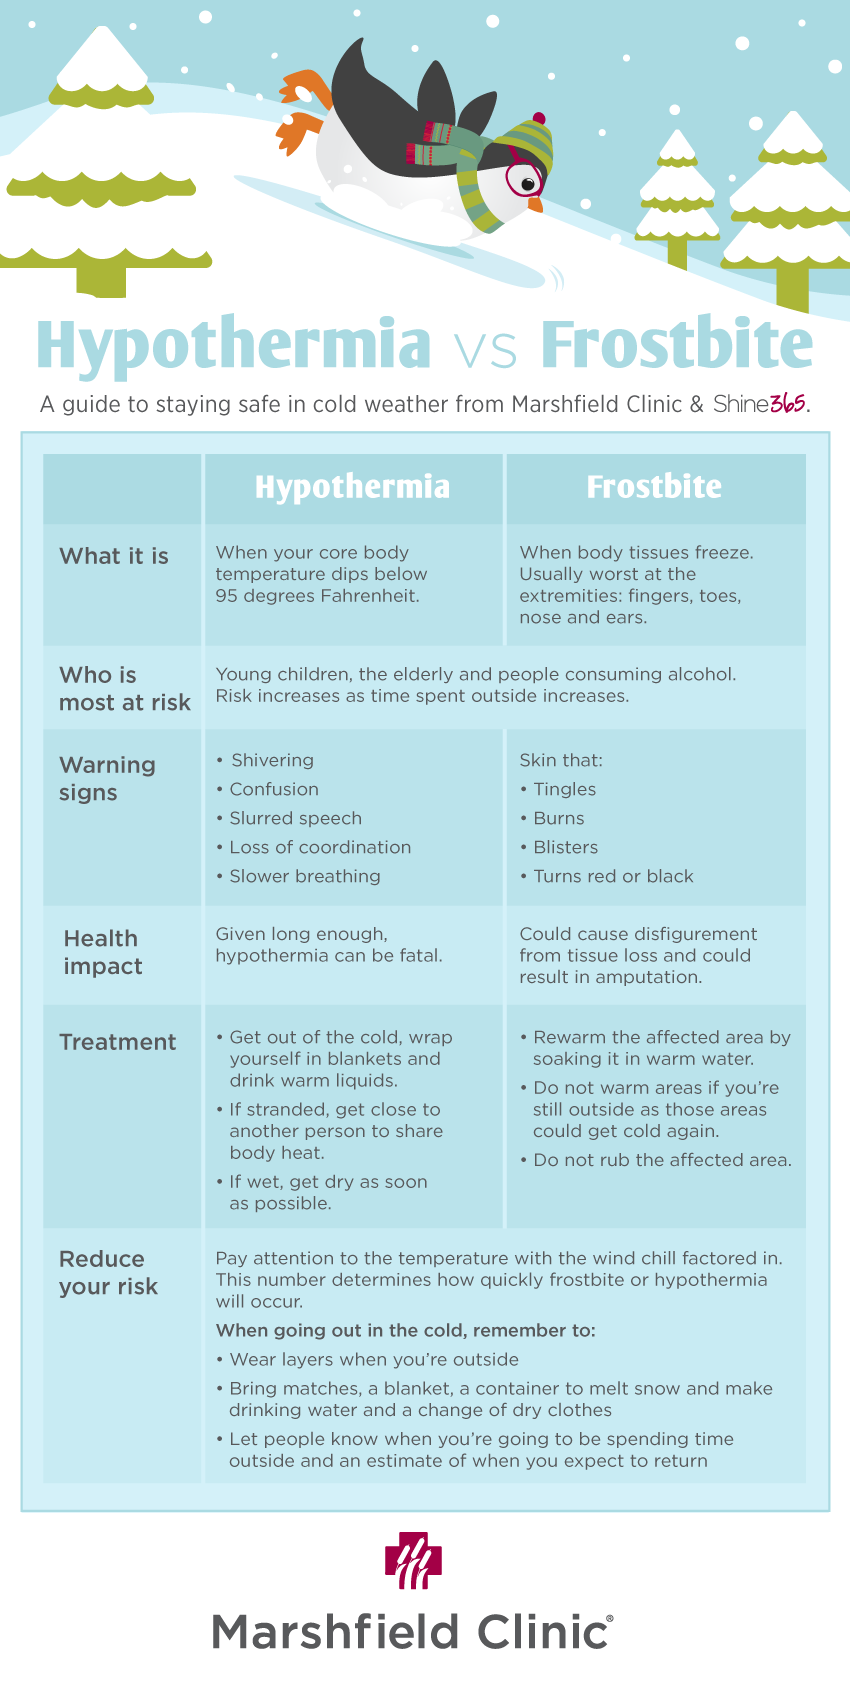 Hypothermia vs Frostbite informational chart